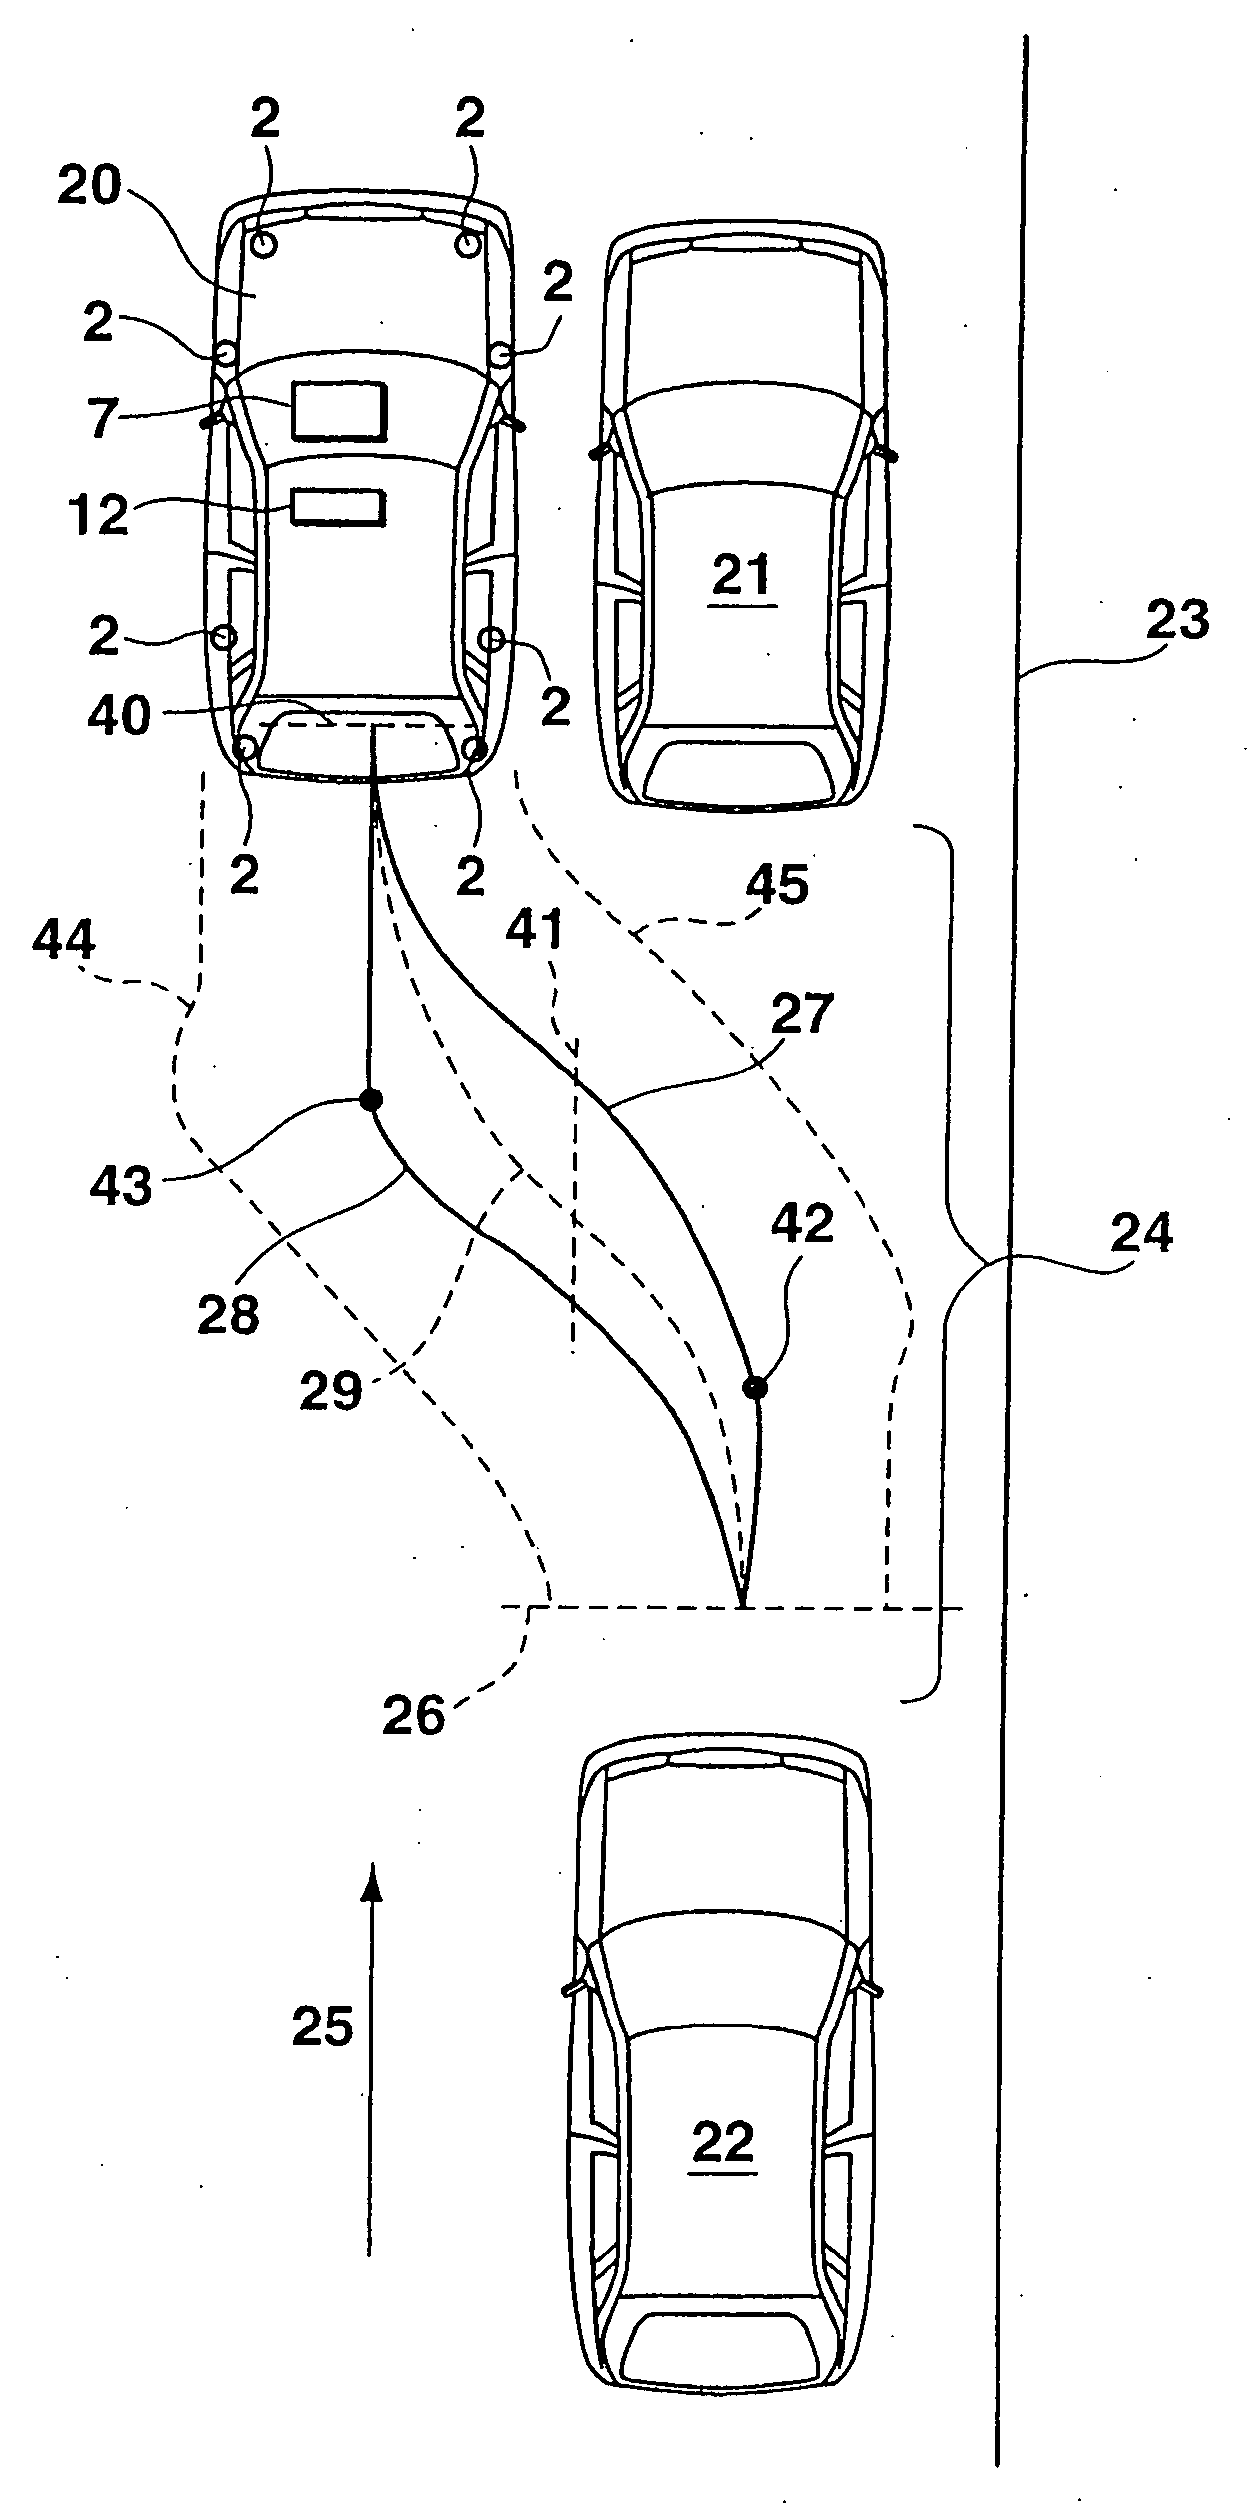 Driver-assist device, in particular, for parking a vehicle